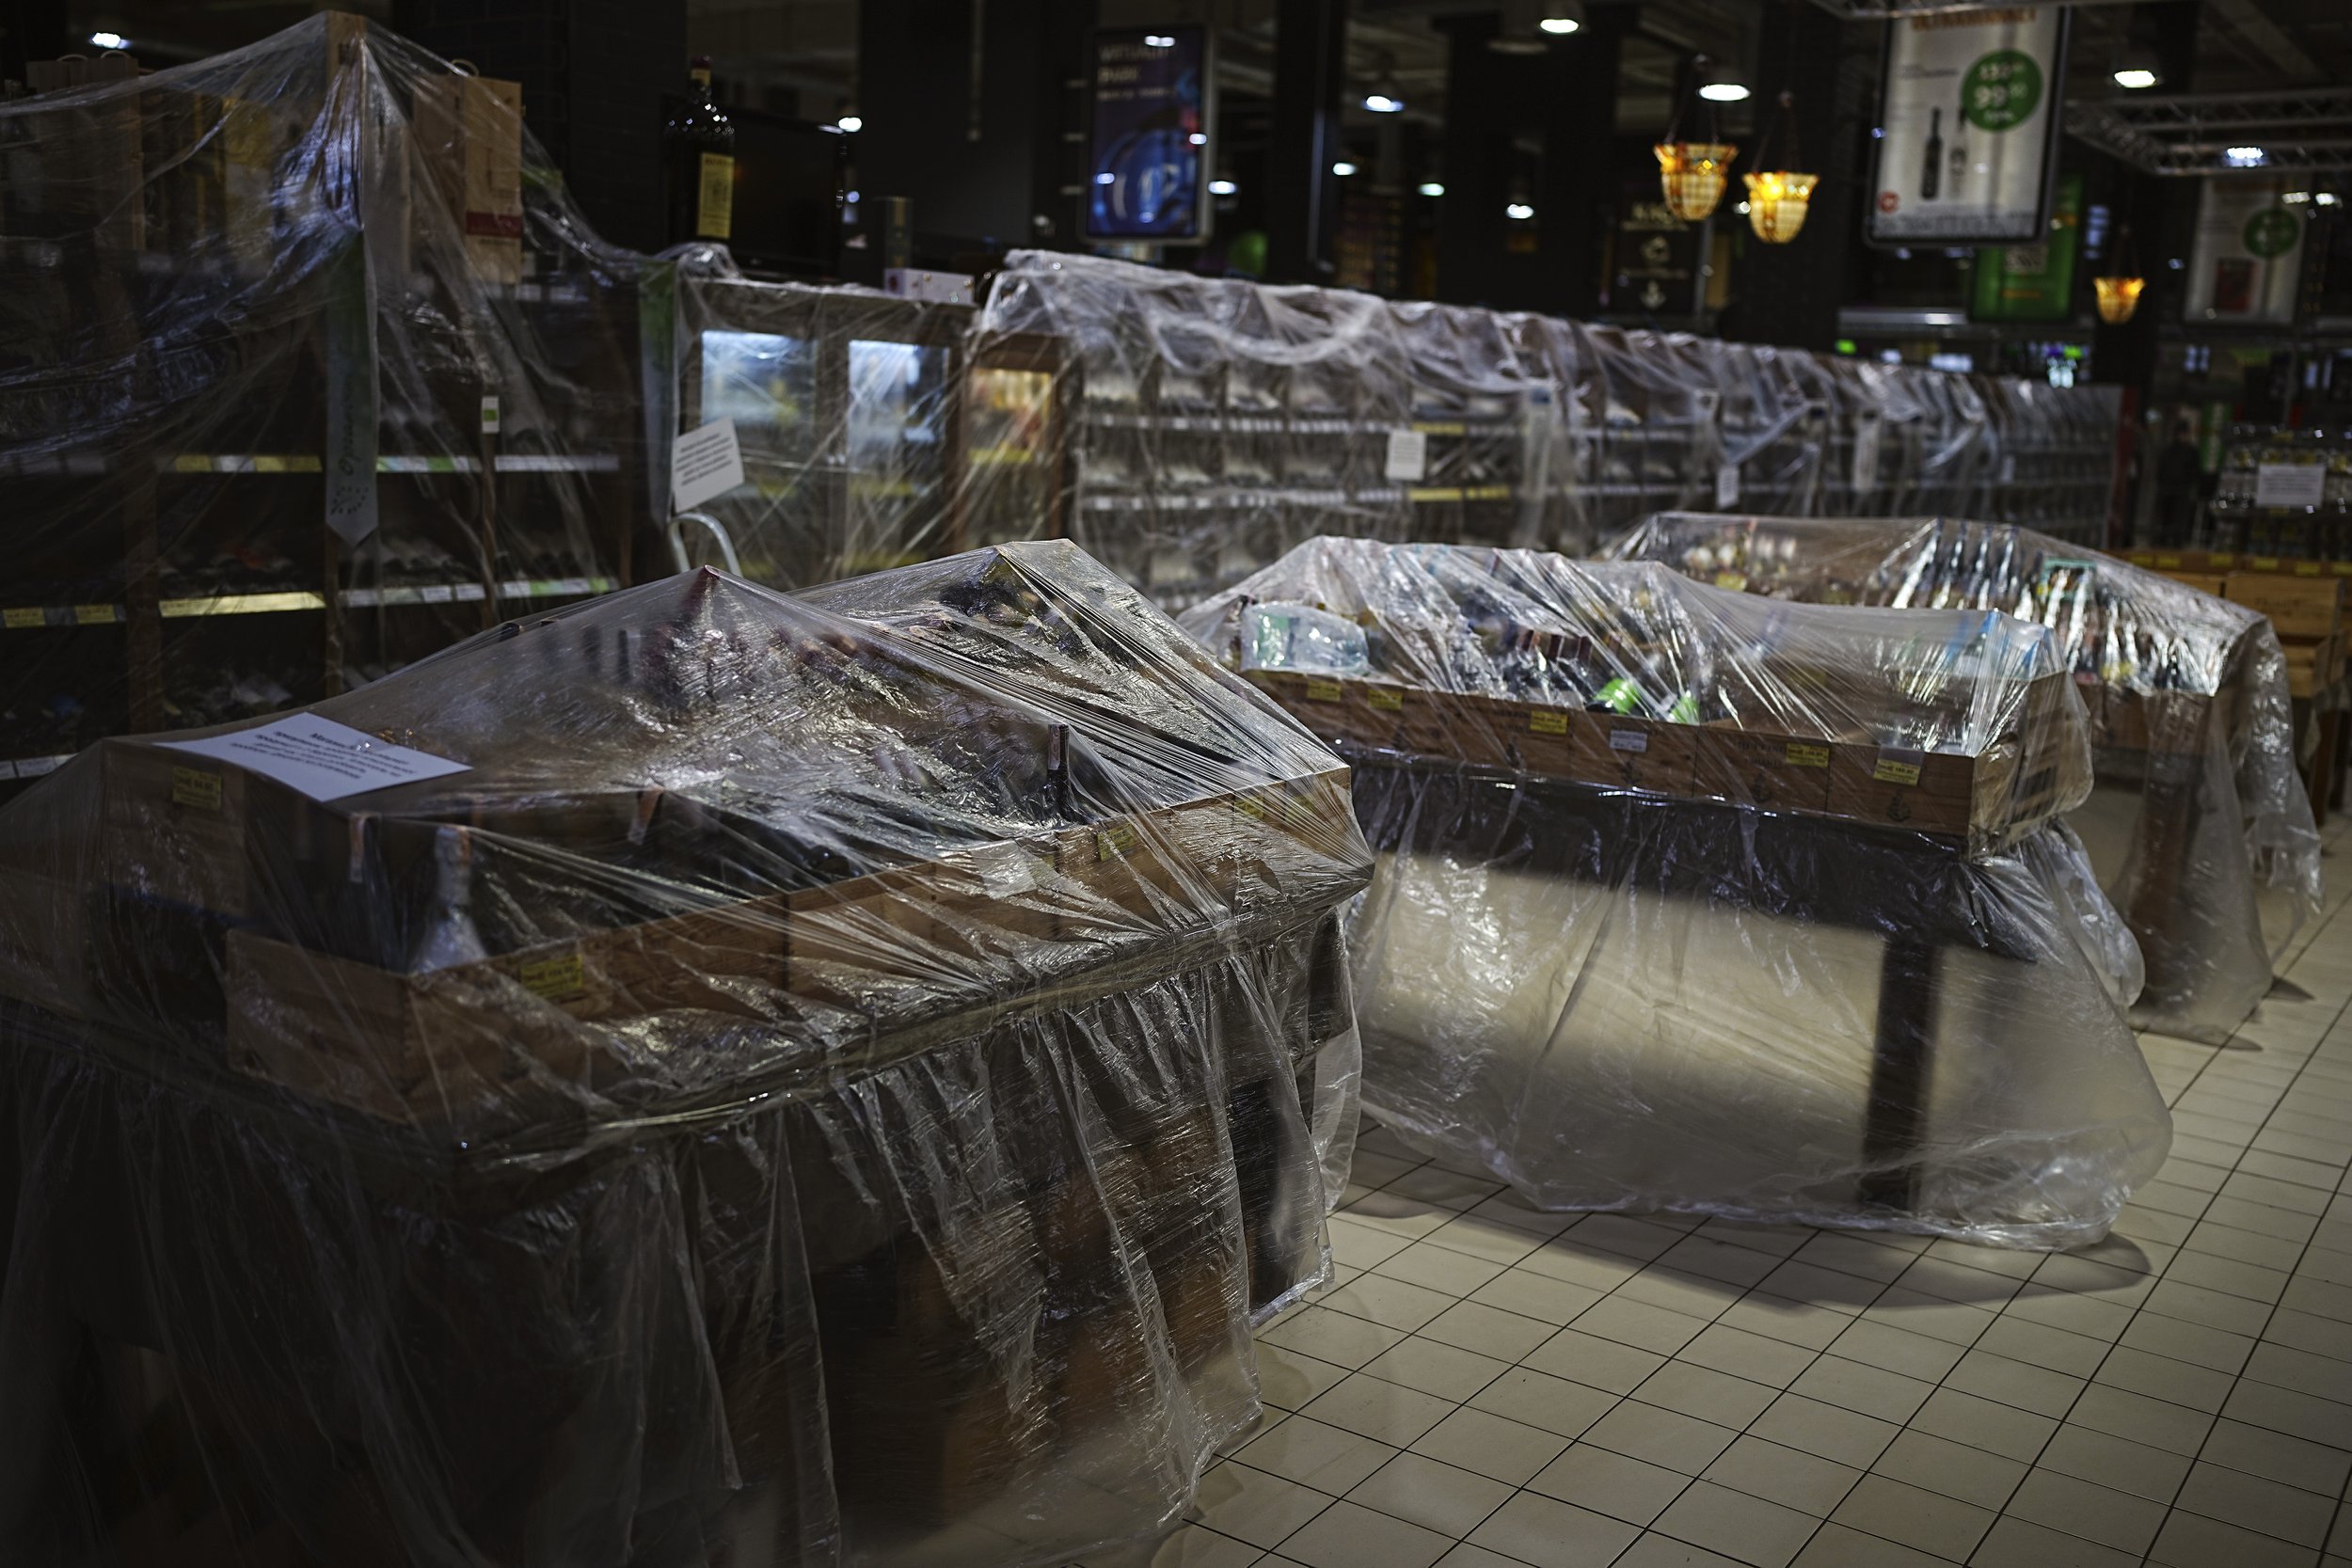  Plastic sheeting wraps shelves with alcoholic beverages banned for sale in a supermarket in Kyiv, Ukraine, Tuesday, March 1, 2022. (AP Photo/Emilio Morenatti) 